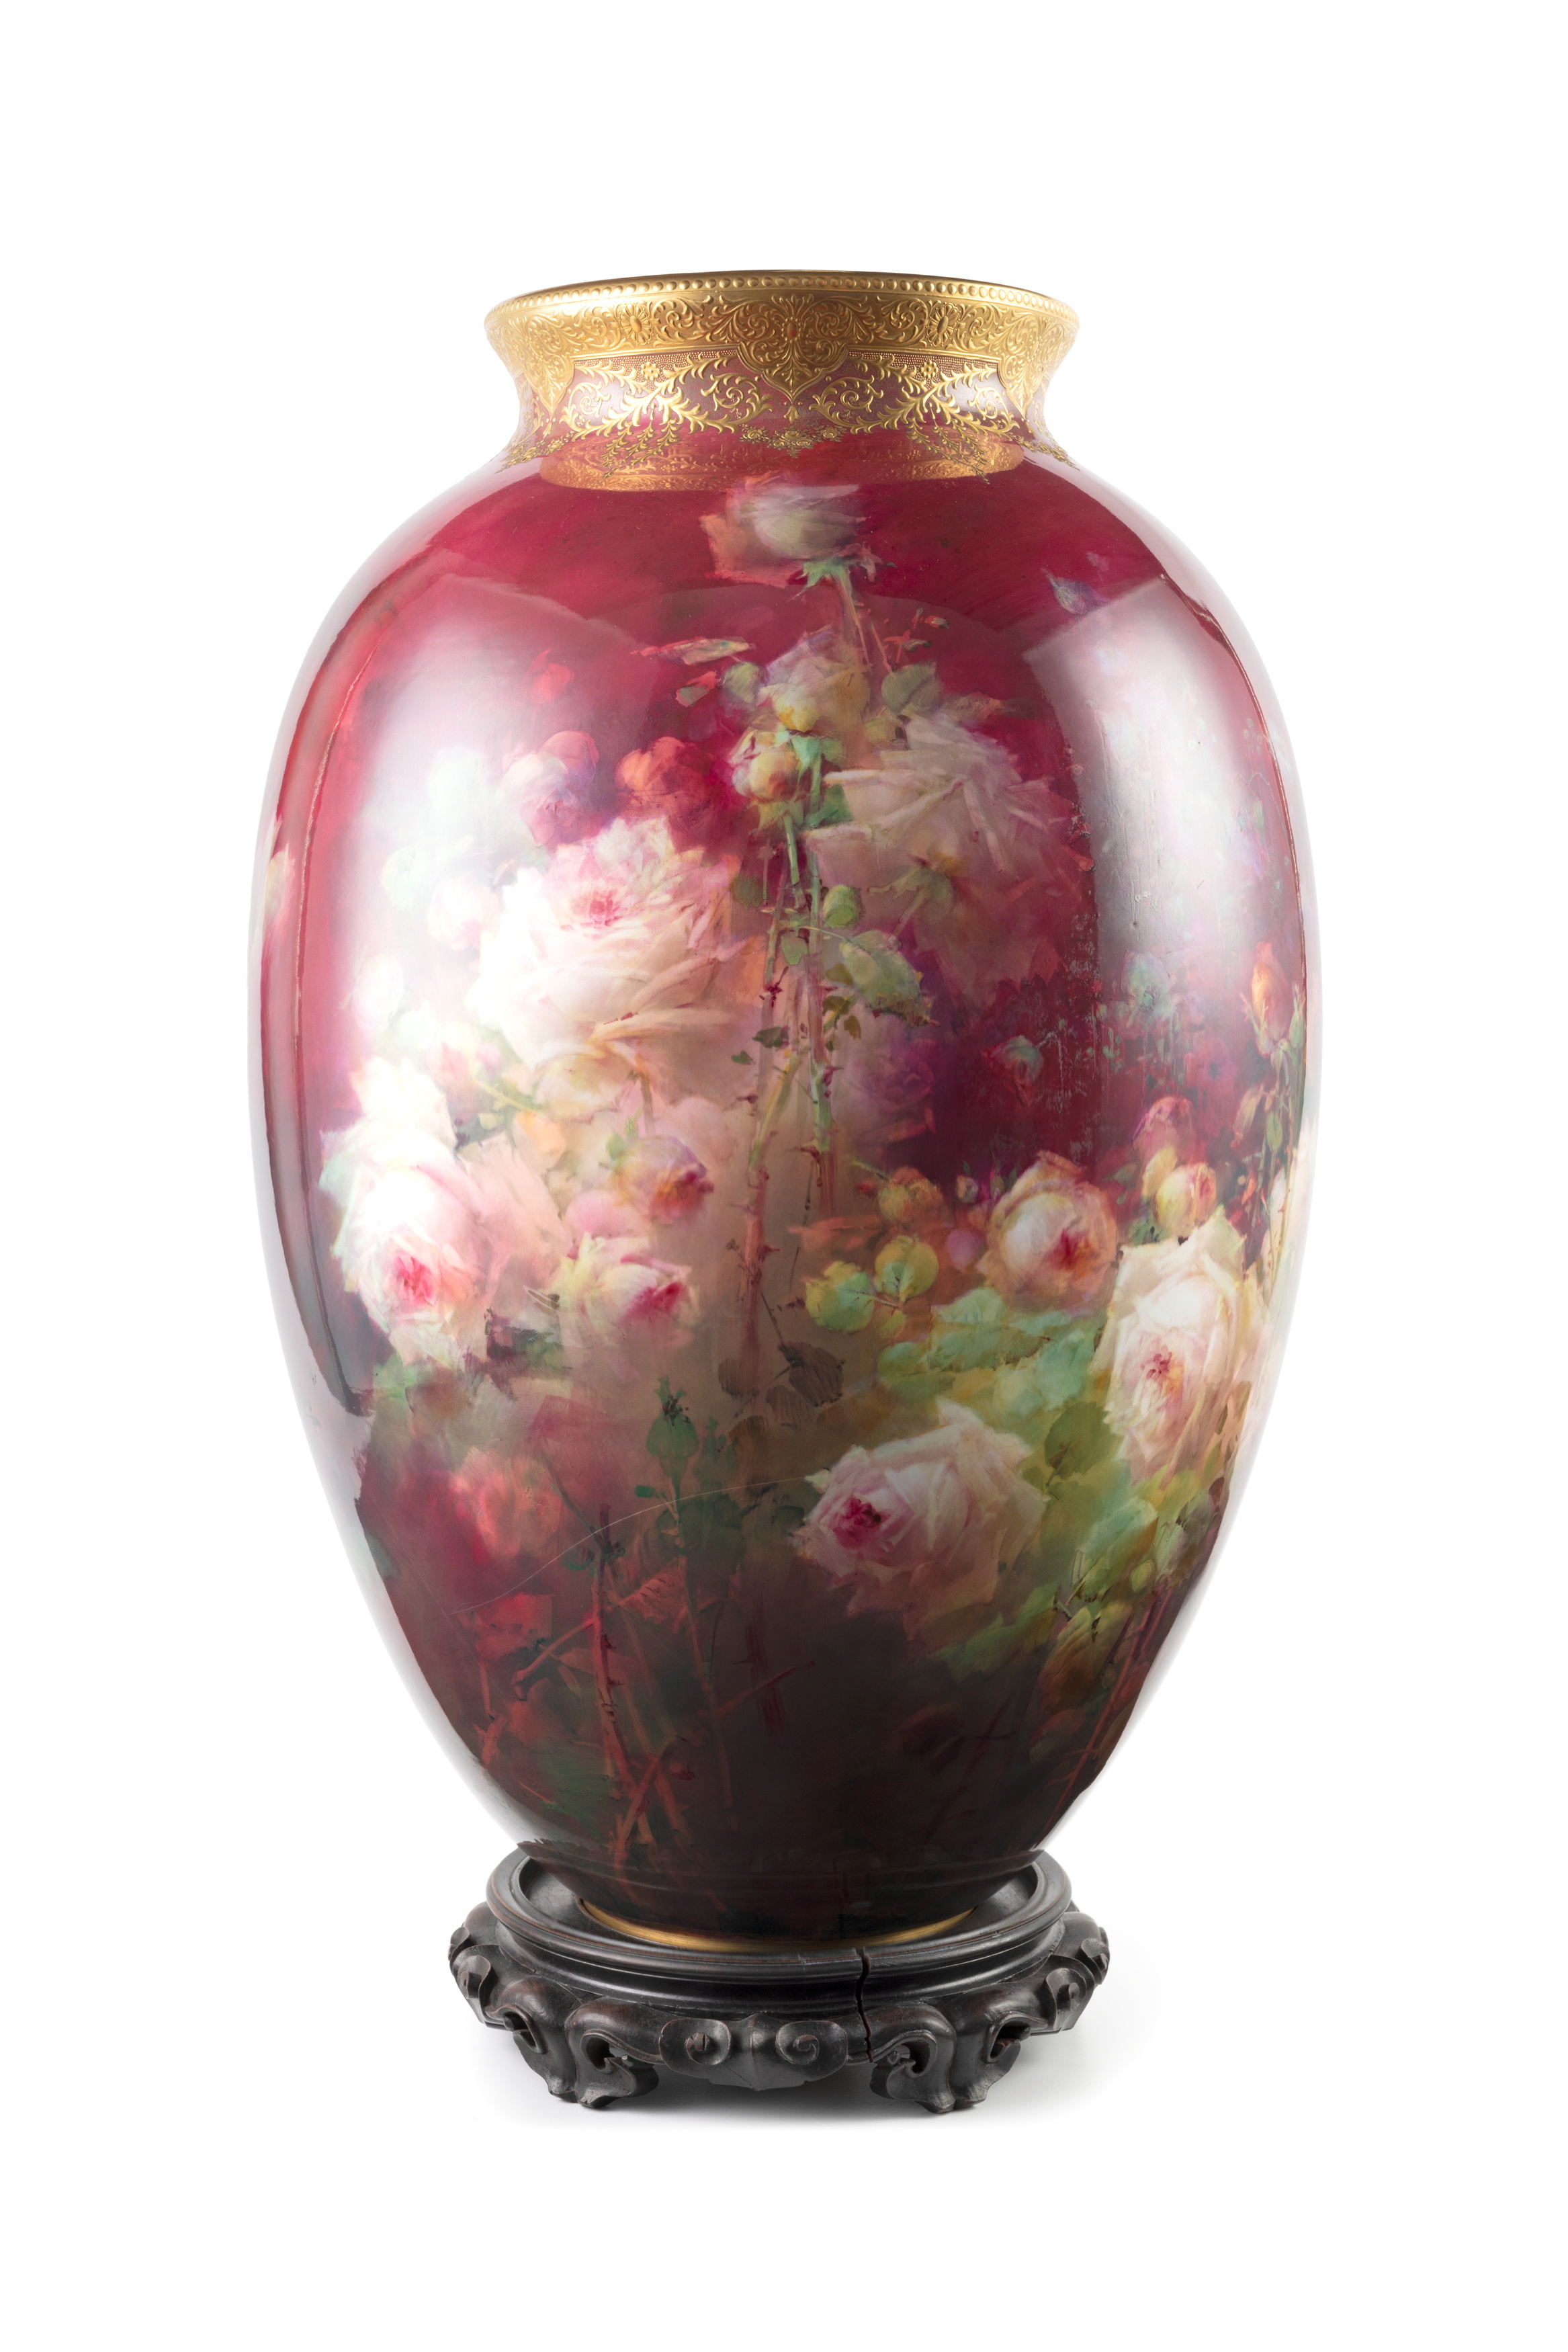 Doulton porcelain vase painted by Edward Raby